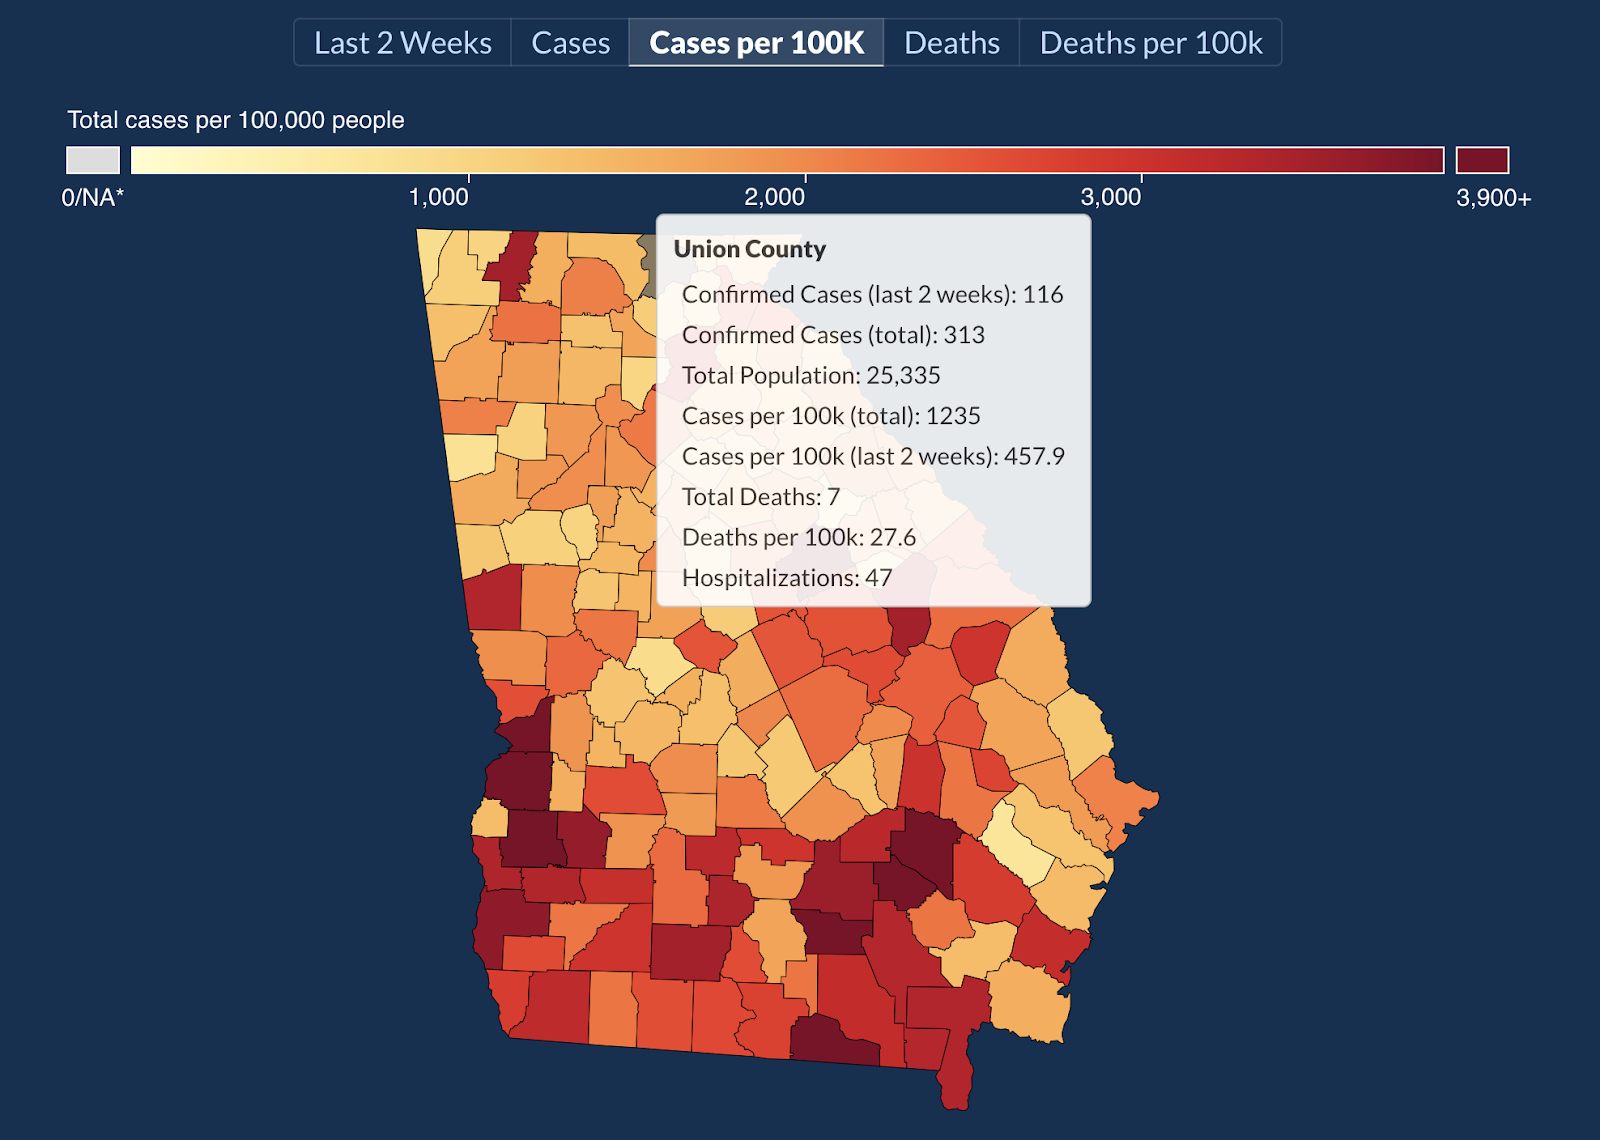 Screenshot of heat map of counties with cases per 100K residents in Georgia with Union County highlighted showing the confirmed cases from the past 2 weeks and total, and other data points that are irrelevant to this post. 